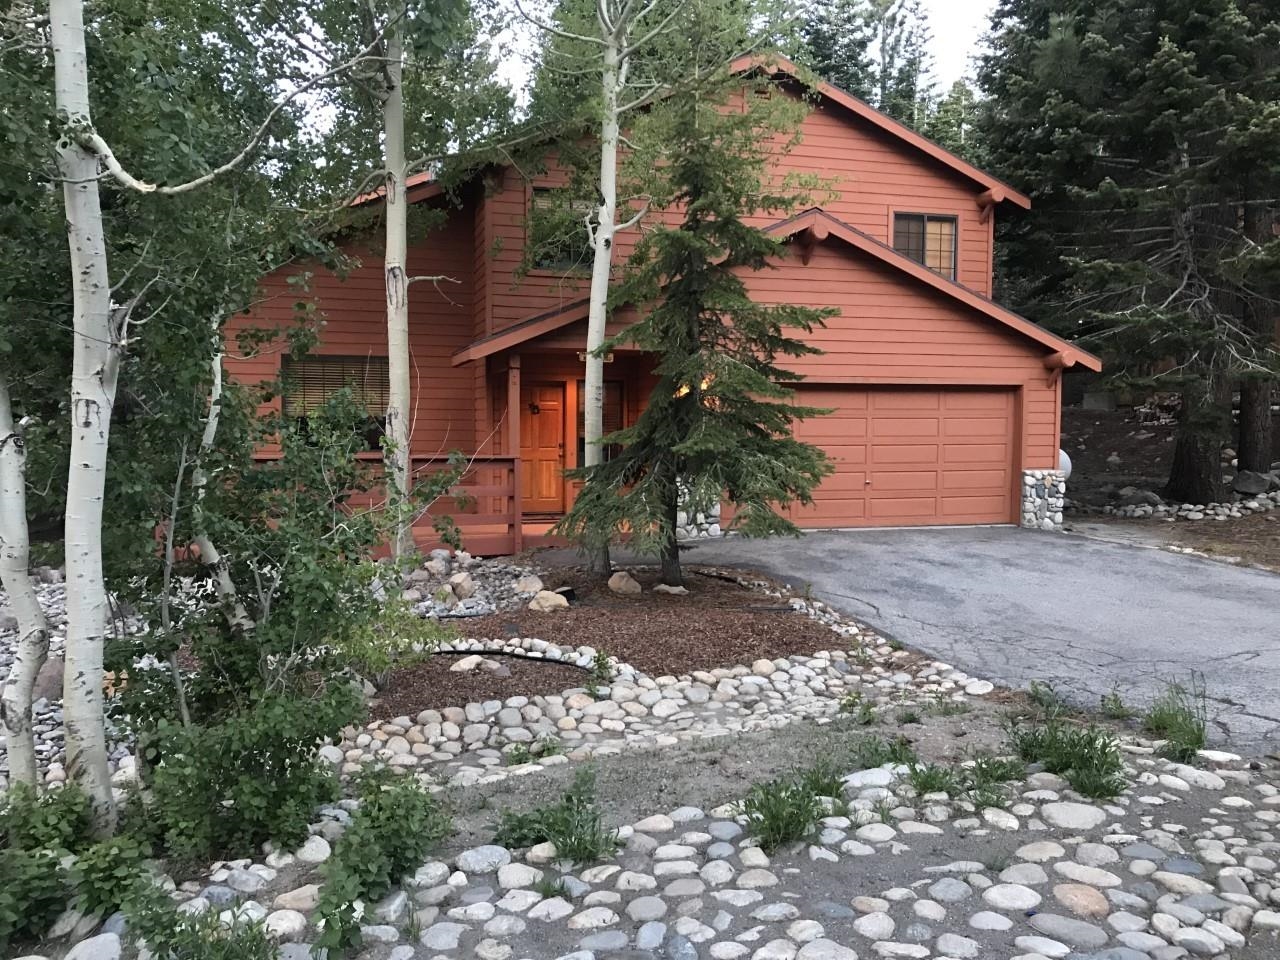 This beautifully maintained home is in the heart of Mammoth Lakes.  The kitchen, dining room, family room, and living room are all on the ground floor.  This traditional floorplan allows for the mud room to lead directly into the living room.  The kitchen is right off the garage and has an oversized pantry. The home has circular floorplan which is great for entertaining.  Double doors lead from both the kitchen and the family room to the large private deck where you can relax and enjoy the outdoors.  There are 4 roomy bedrooms upstairs with plenty of natural light.  Located halfway between Little Eagle Base Lodge and the Village at Mammoth with a shuttle stop about 7 houses away, this is arguably one of the best locations in Mammoth.  There is forced air throughout the home and a wood burning stove in the living room.  New appliances, renovated private deck, lots of sunshine and a super quiet street.  Come make this your new home in the mountains!